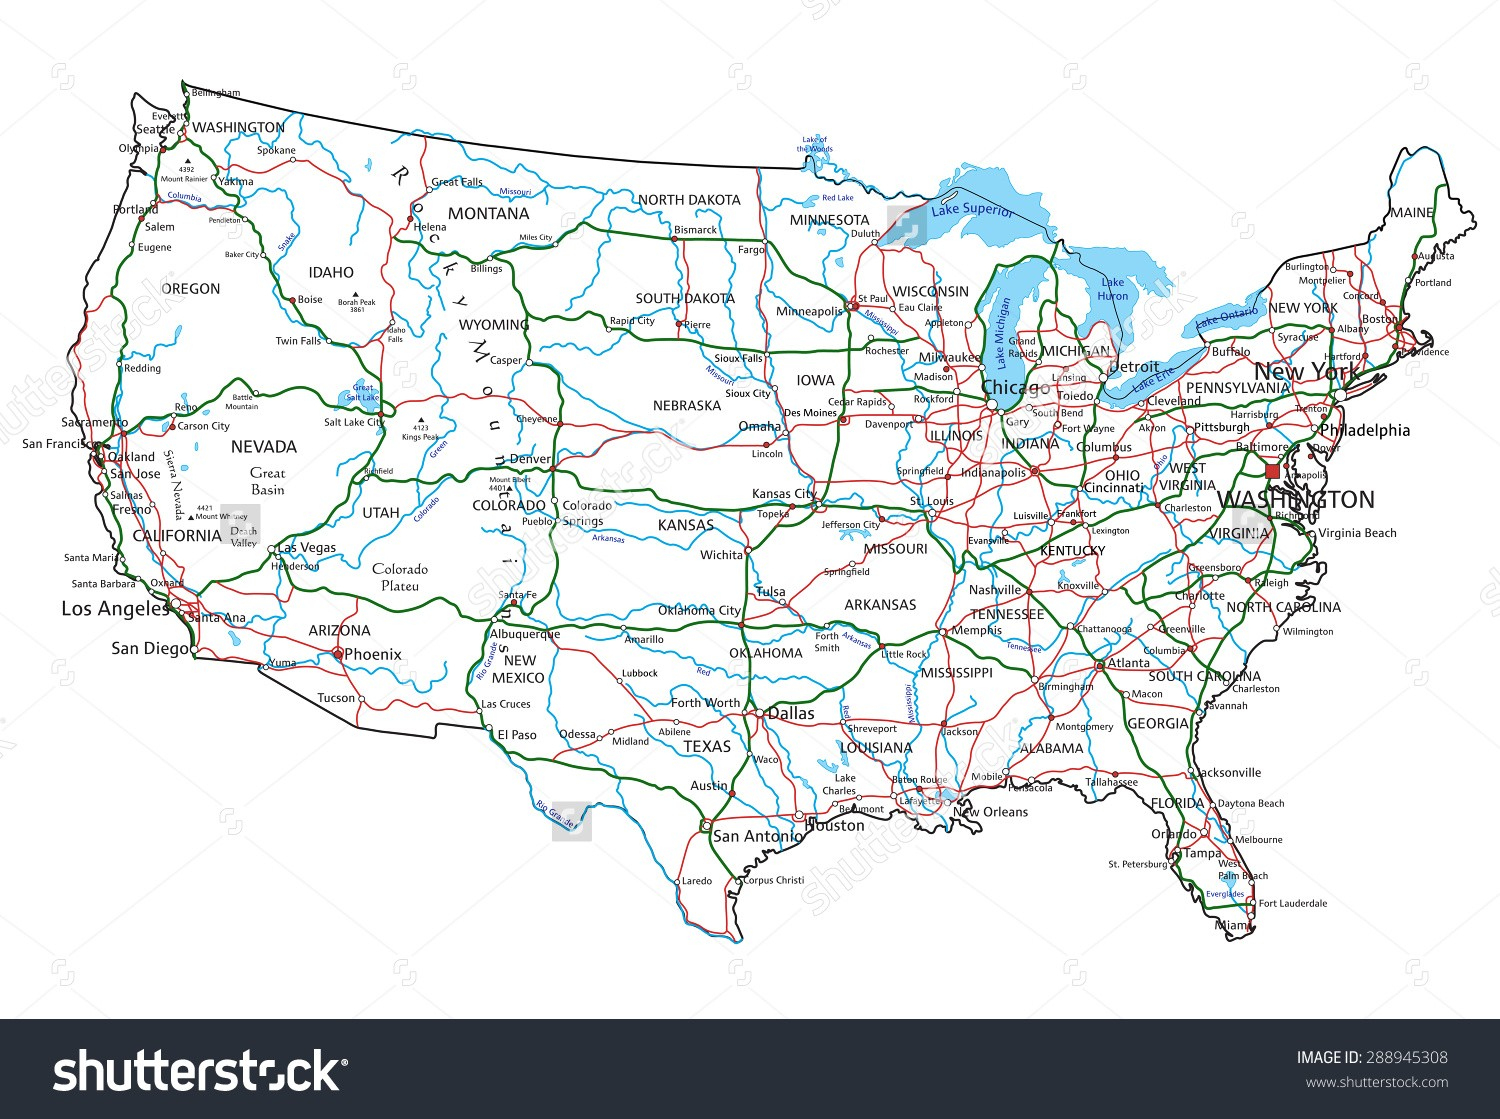 Free Printable Us Highway Map Usa Road Vector For With Random Roads - Free Printable Road Maps Of The United States